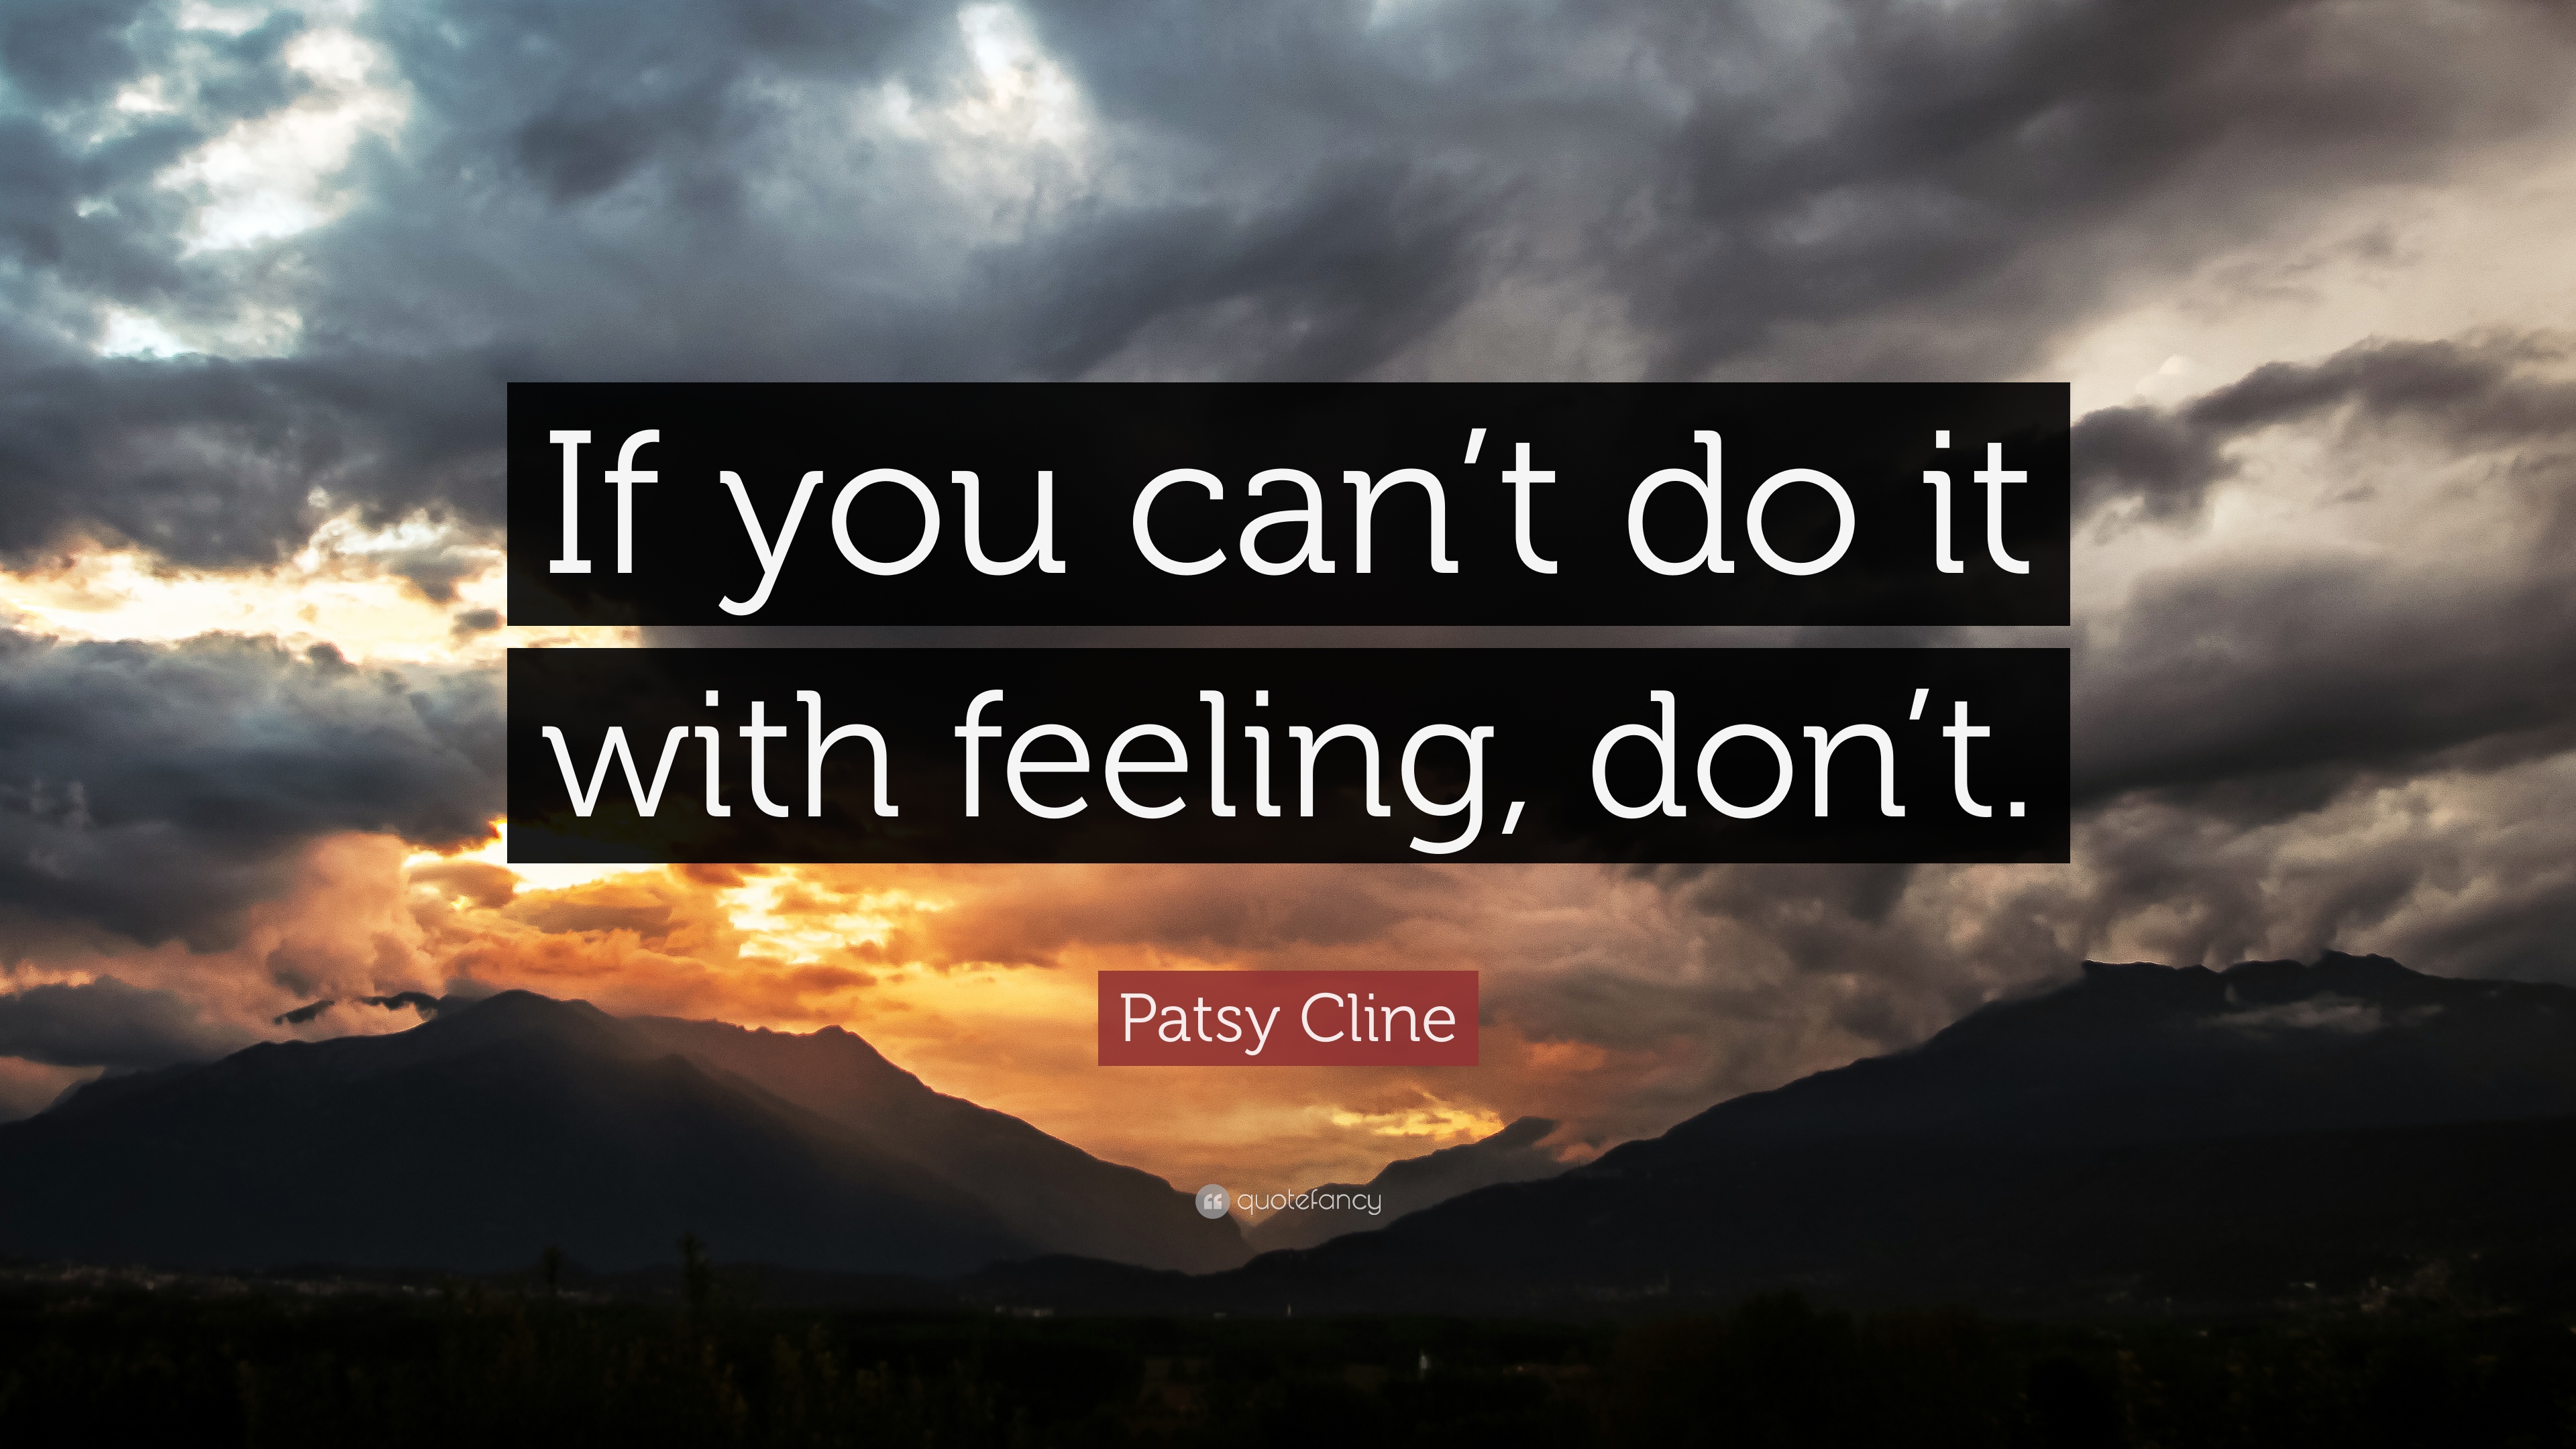 10 Best Patsy Cline Quotes